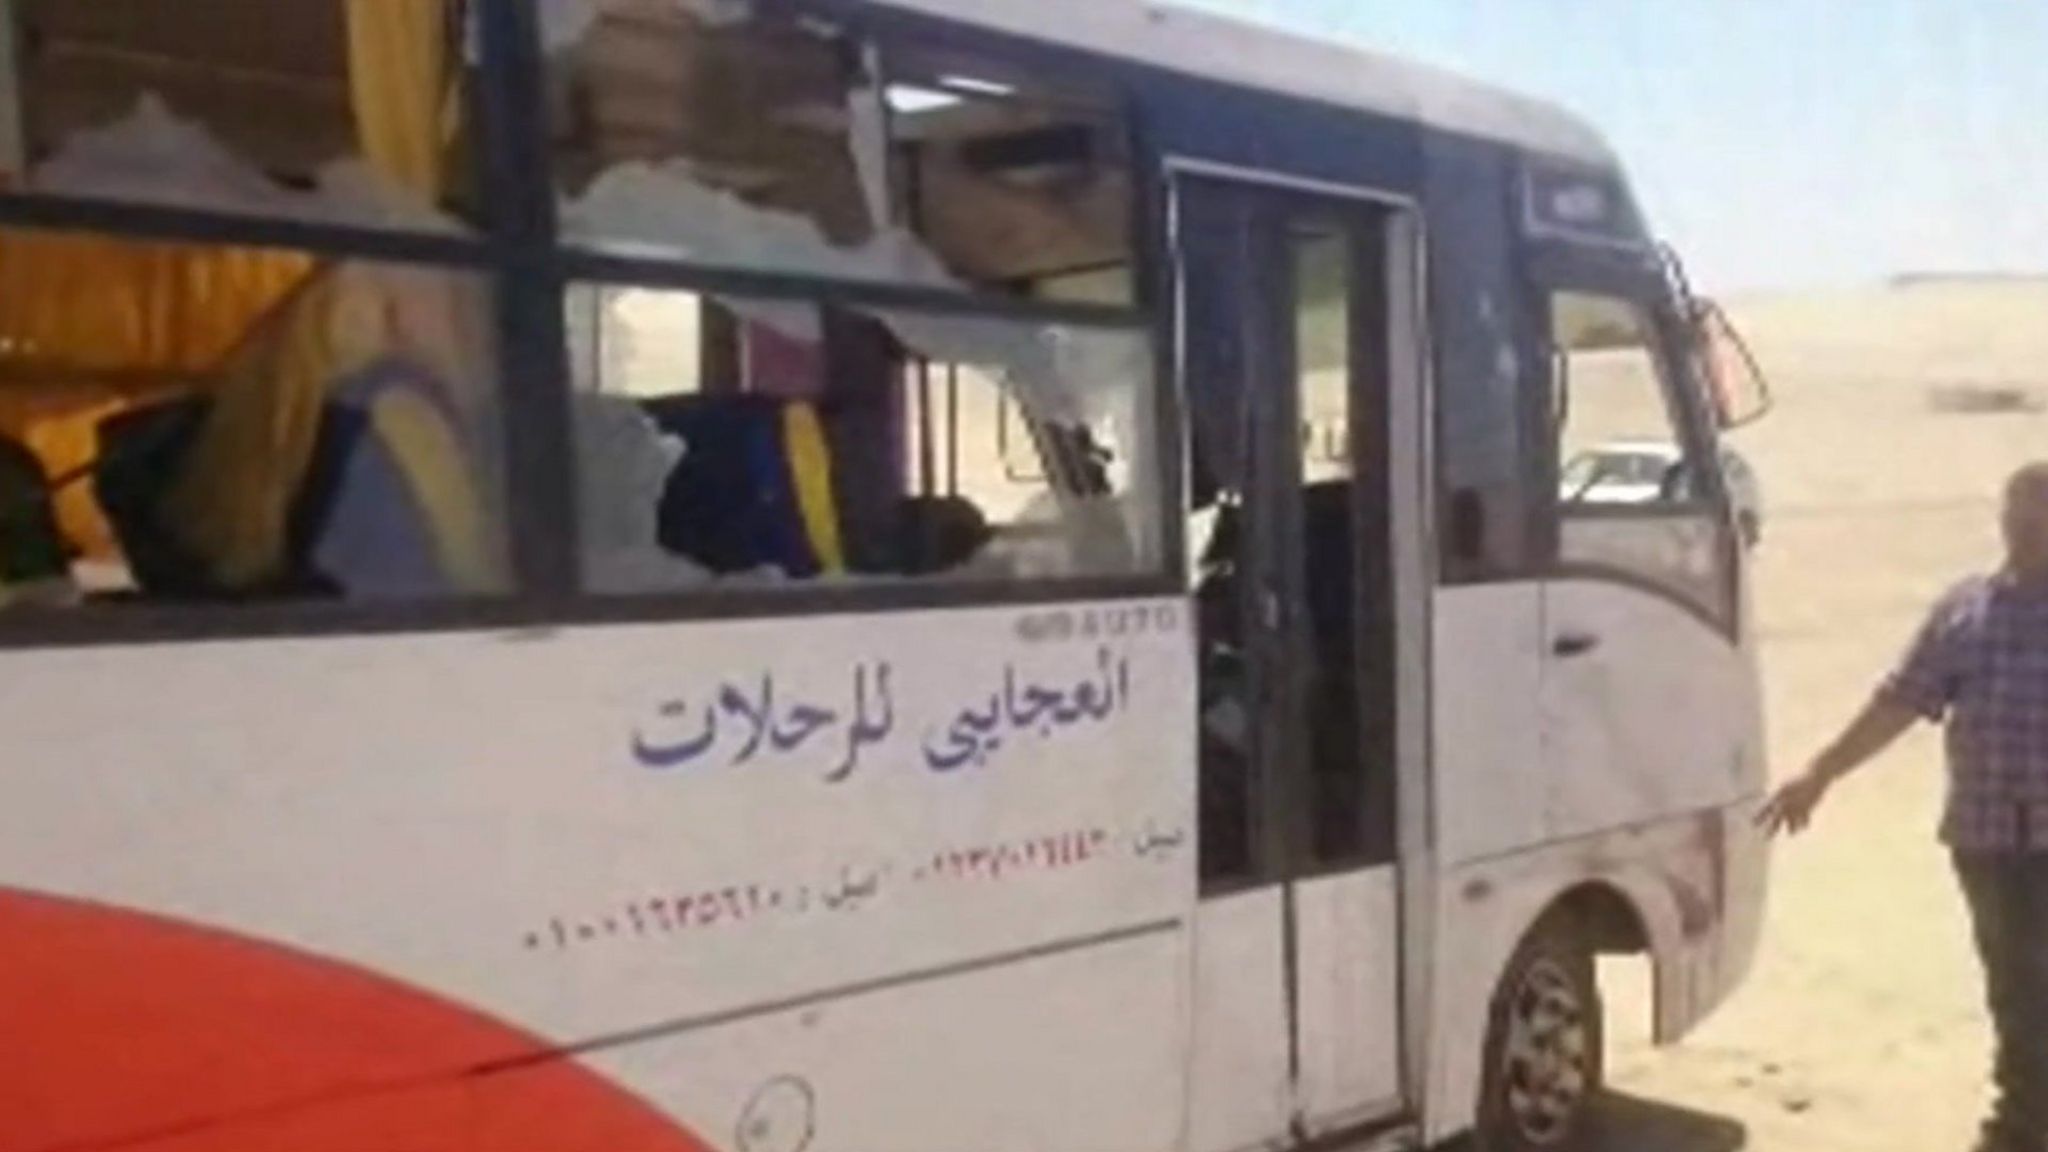 Screengrab of video purportedly showing the aftermath of the attack on a bus carrying Coptic Christians in Minya province on 26 May 2017